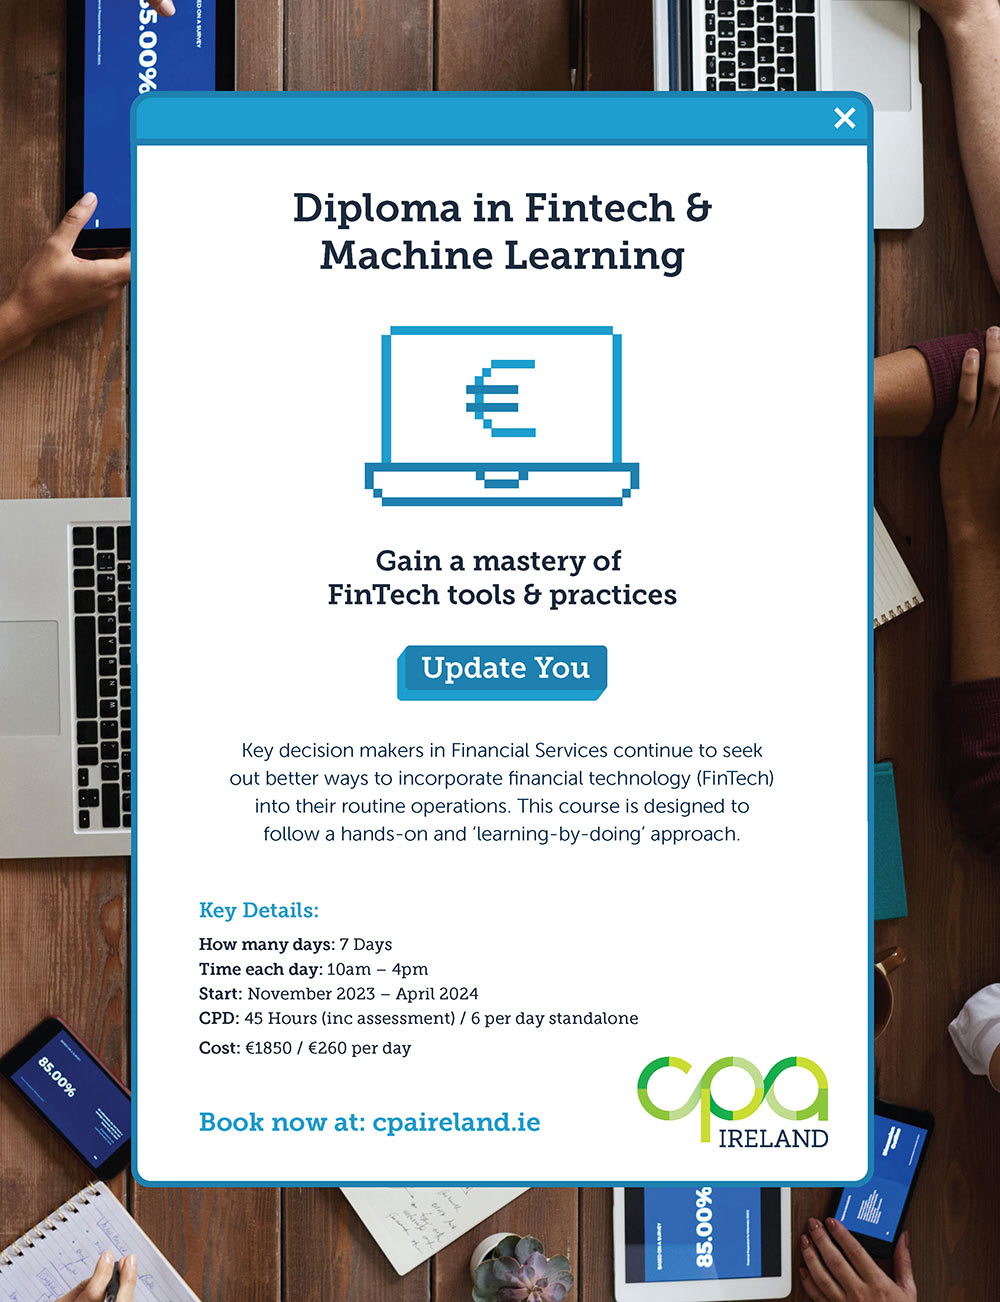 CPA Ireland Diploma in Fintech & Machine Learning Advertisement